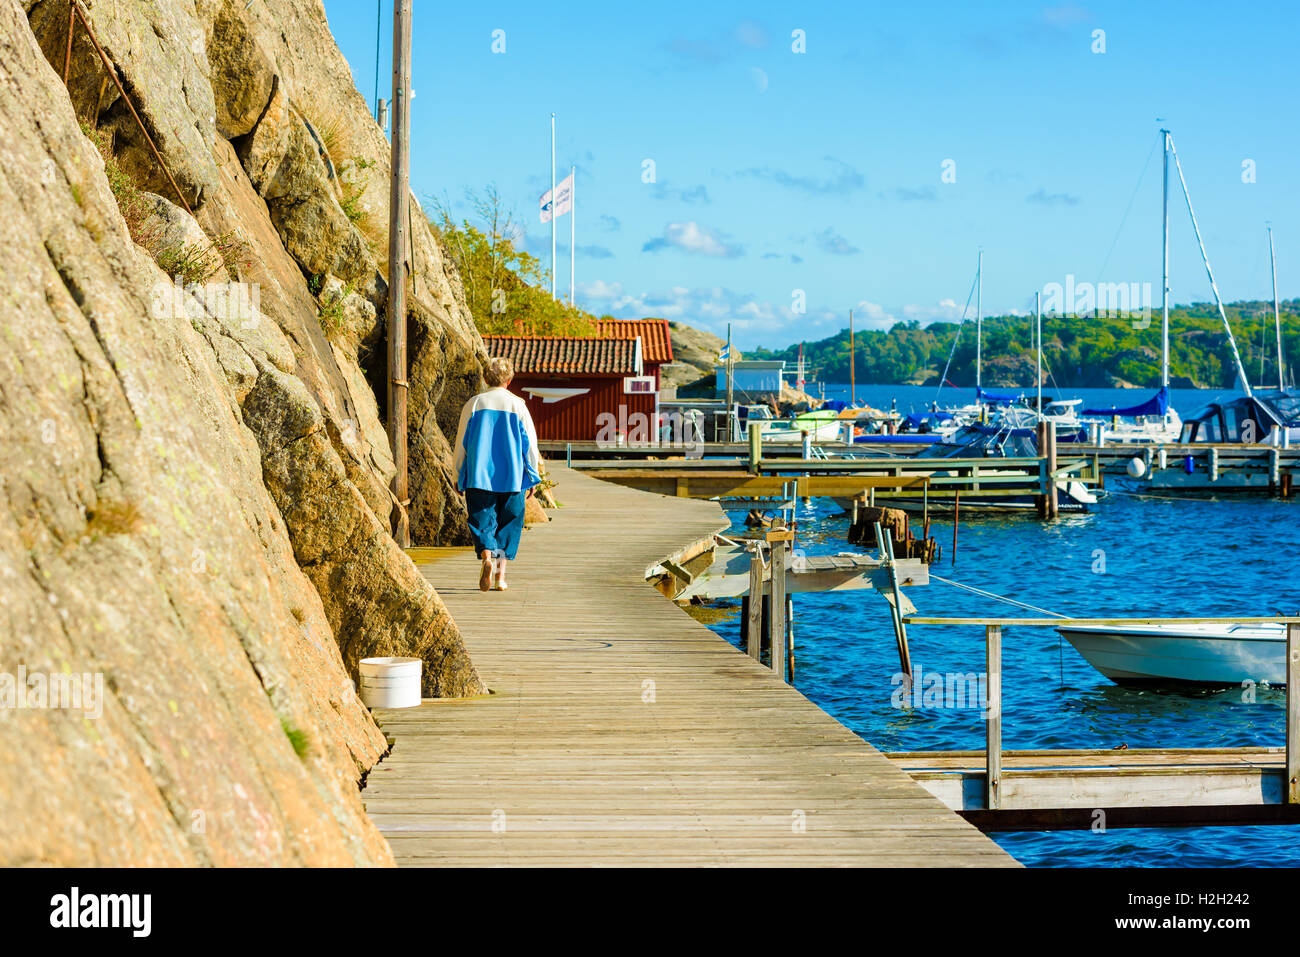 Nosund, Sweden - September 9, 2016: Real life documentary of senior female taking a walk along the seaside pier with steep cliff Stock Photo